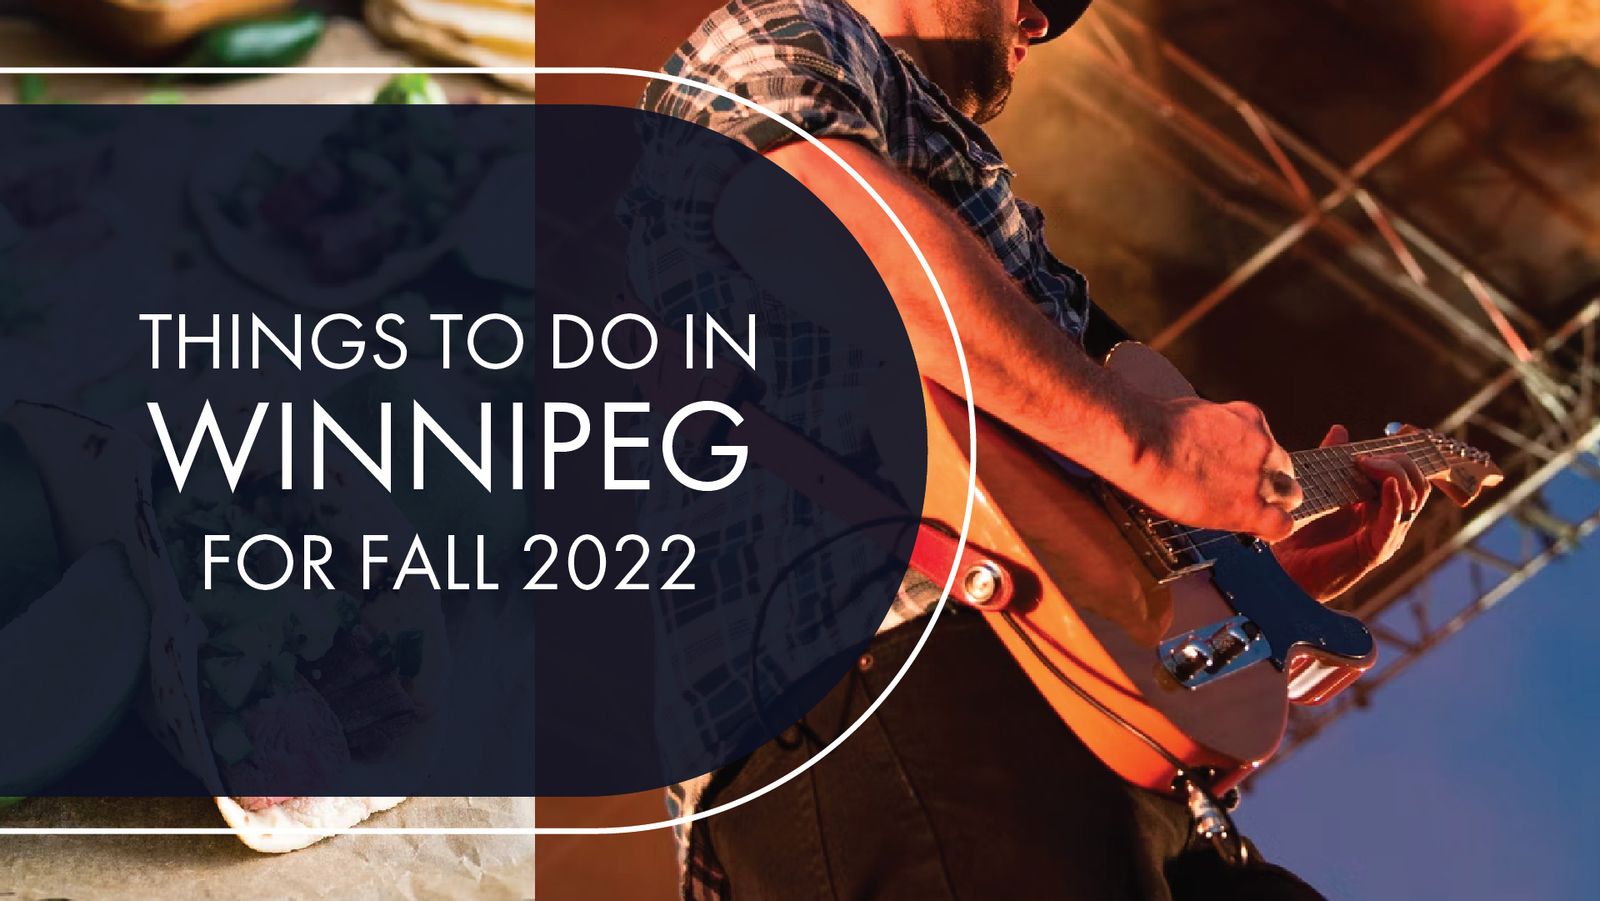 Things to do in Winnipeg for Fall 2022